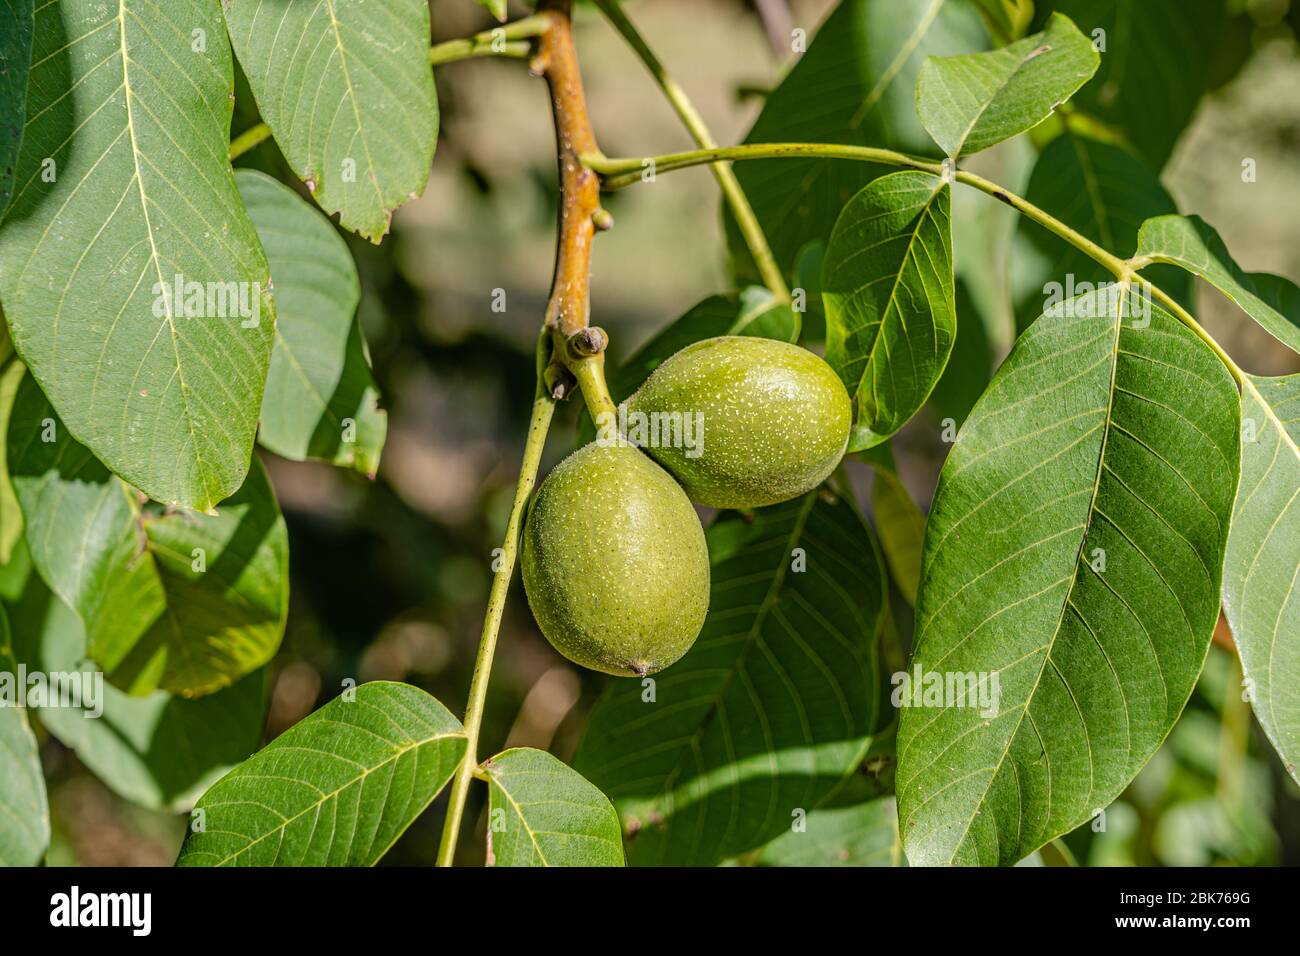 Two walnuts a growing ontree branch in organic farming, scientific name: juglans of the family Juglandaceae Stock Photo